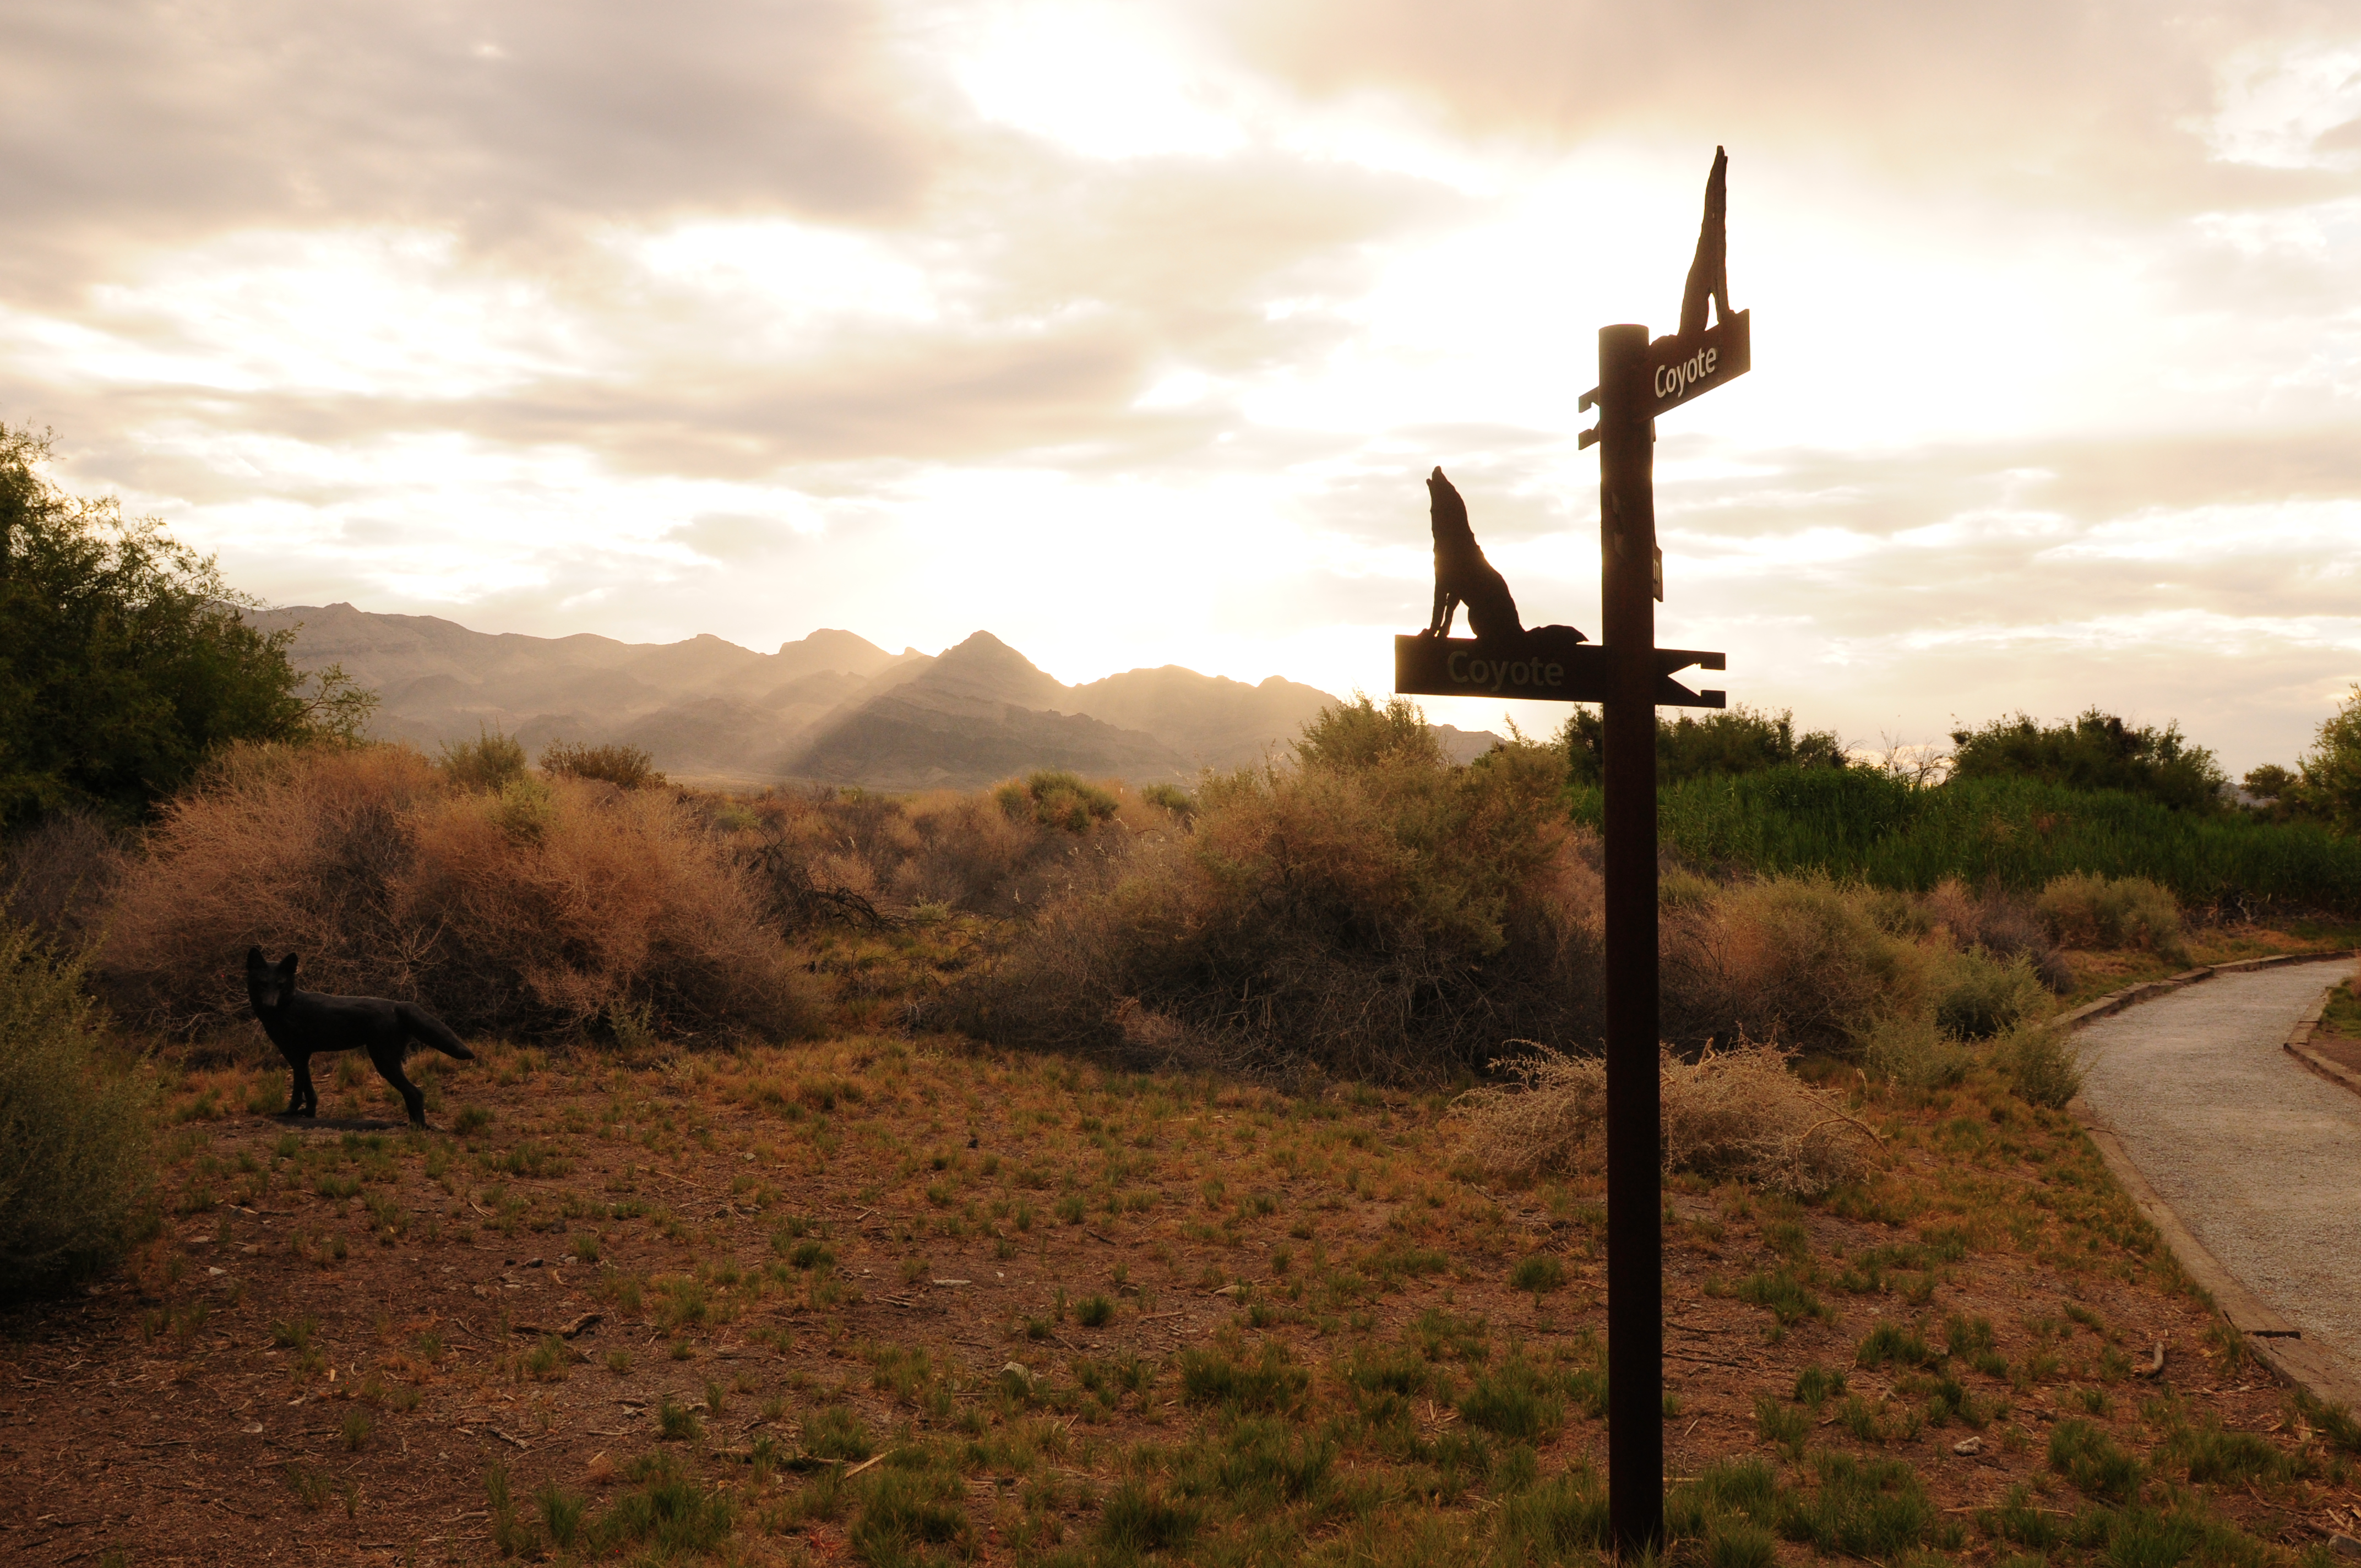 Trail signpost and metal coyote statue in foreground; mountains and a cloudburst in the distance